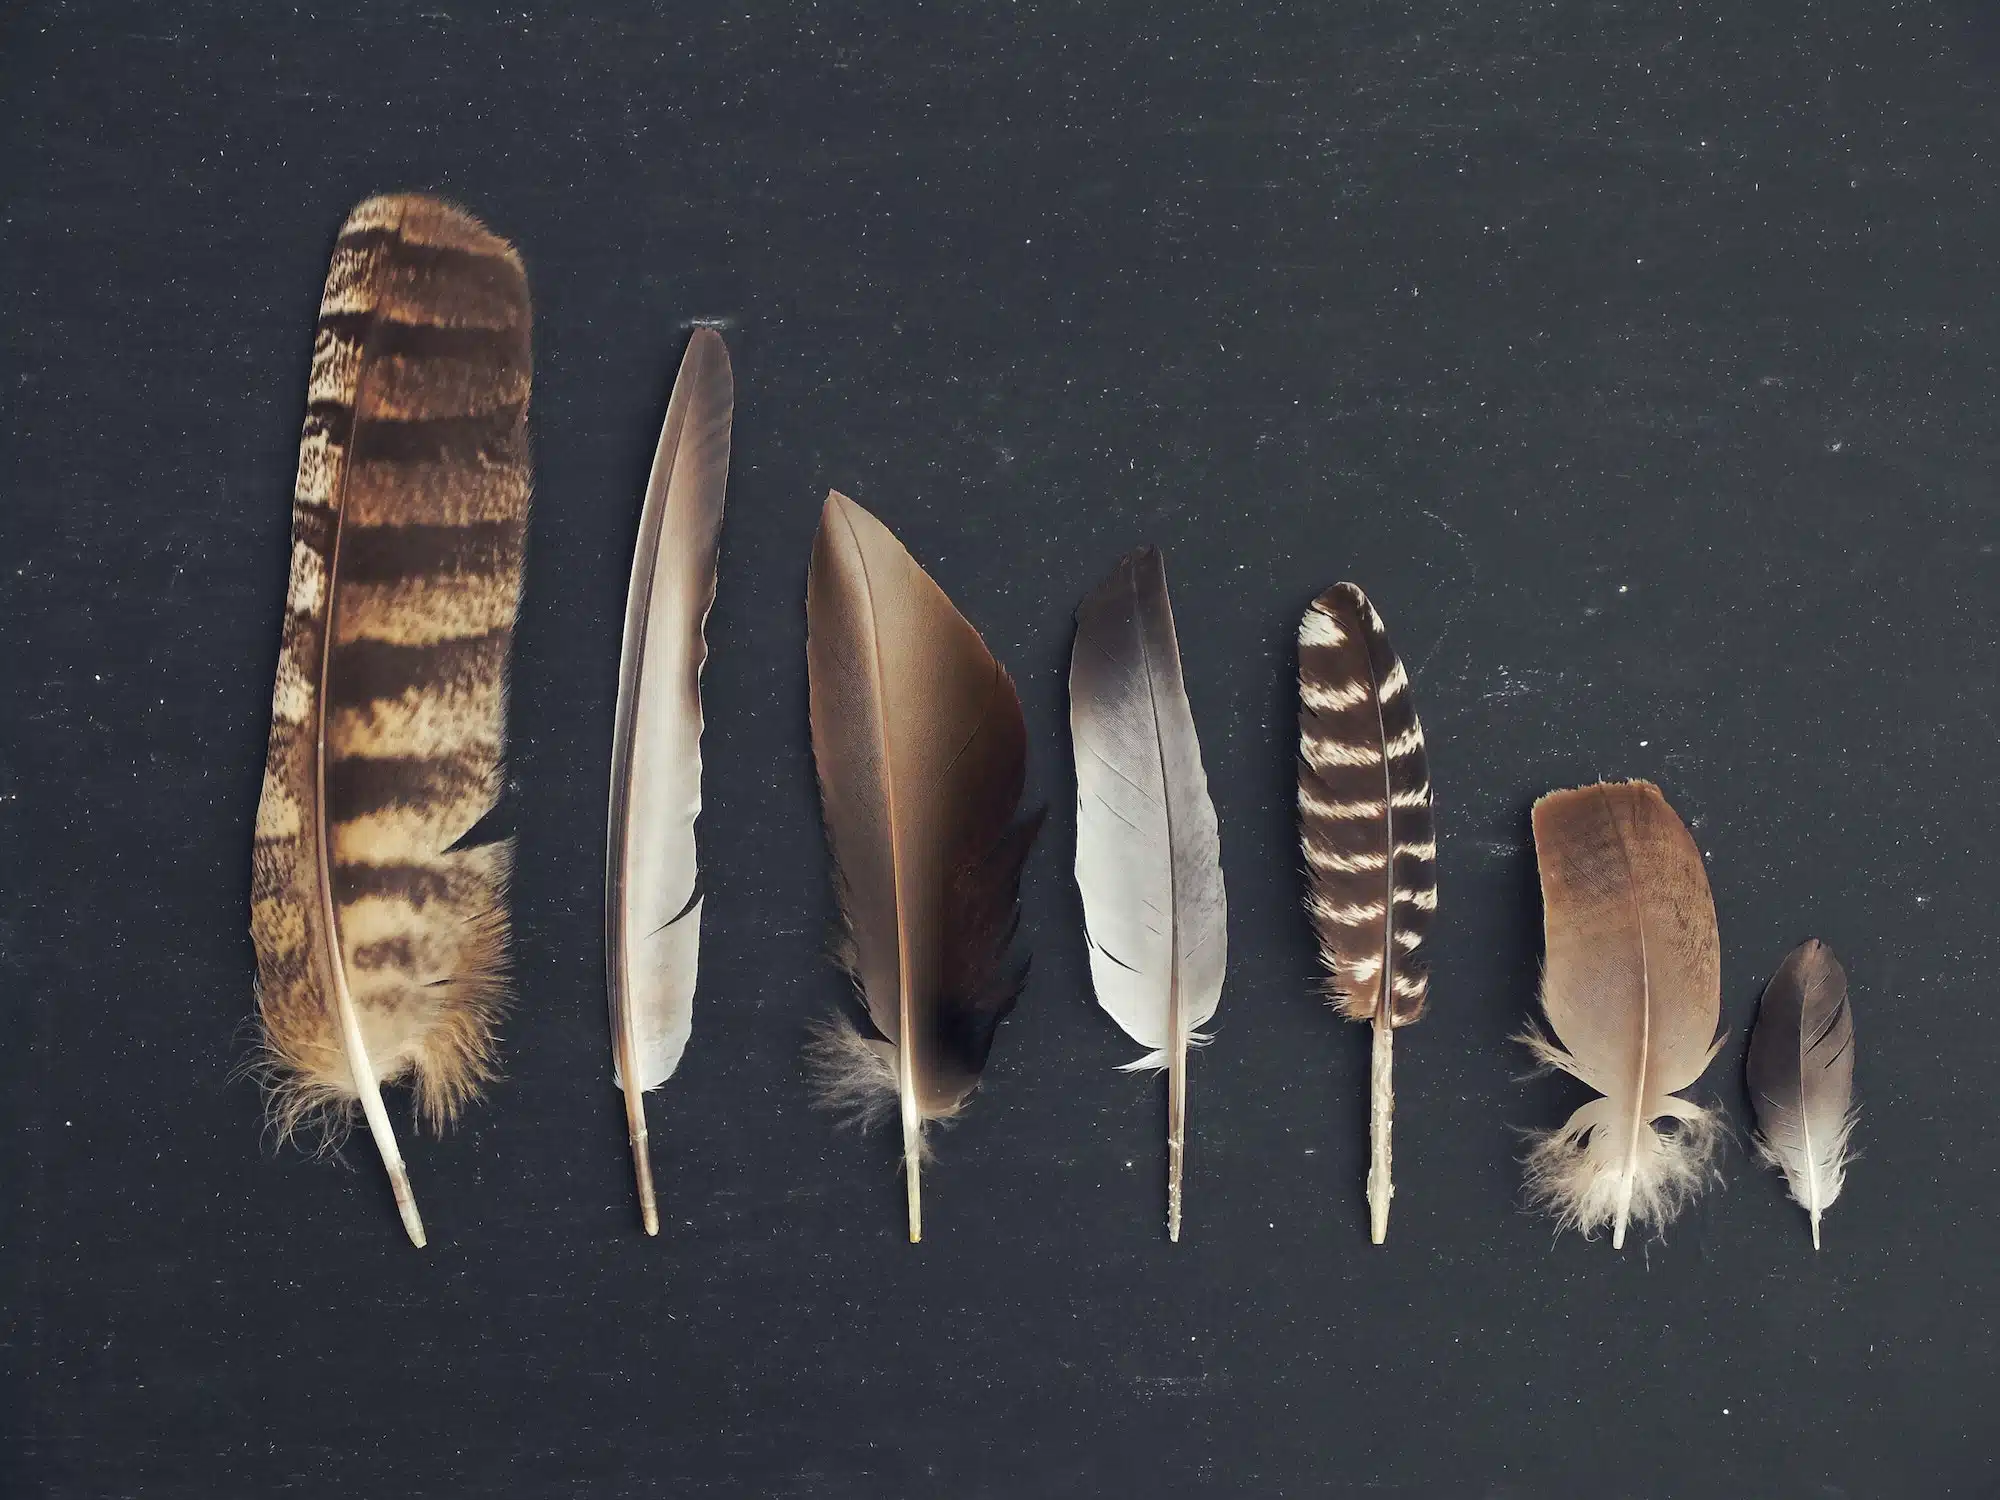 Seven brown feathers laid out against a black background going from the tallest to the smallest